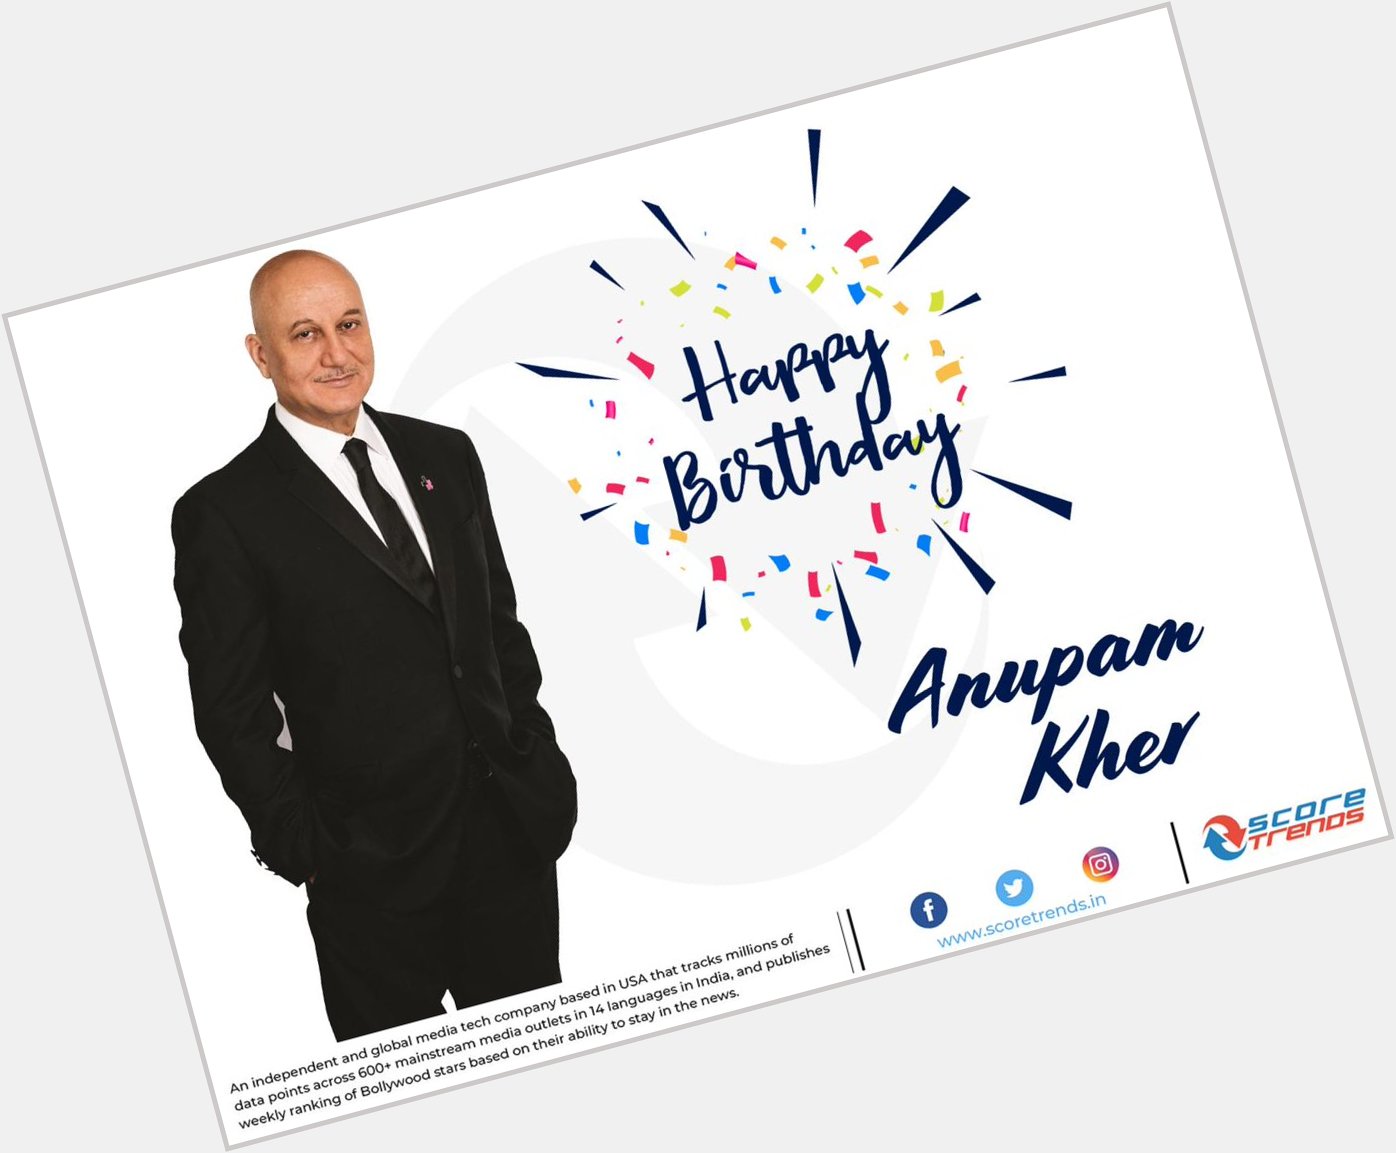 Score Trends wishes Anupam Kher a Happy Birthday!! 